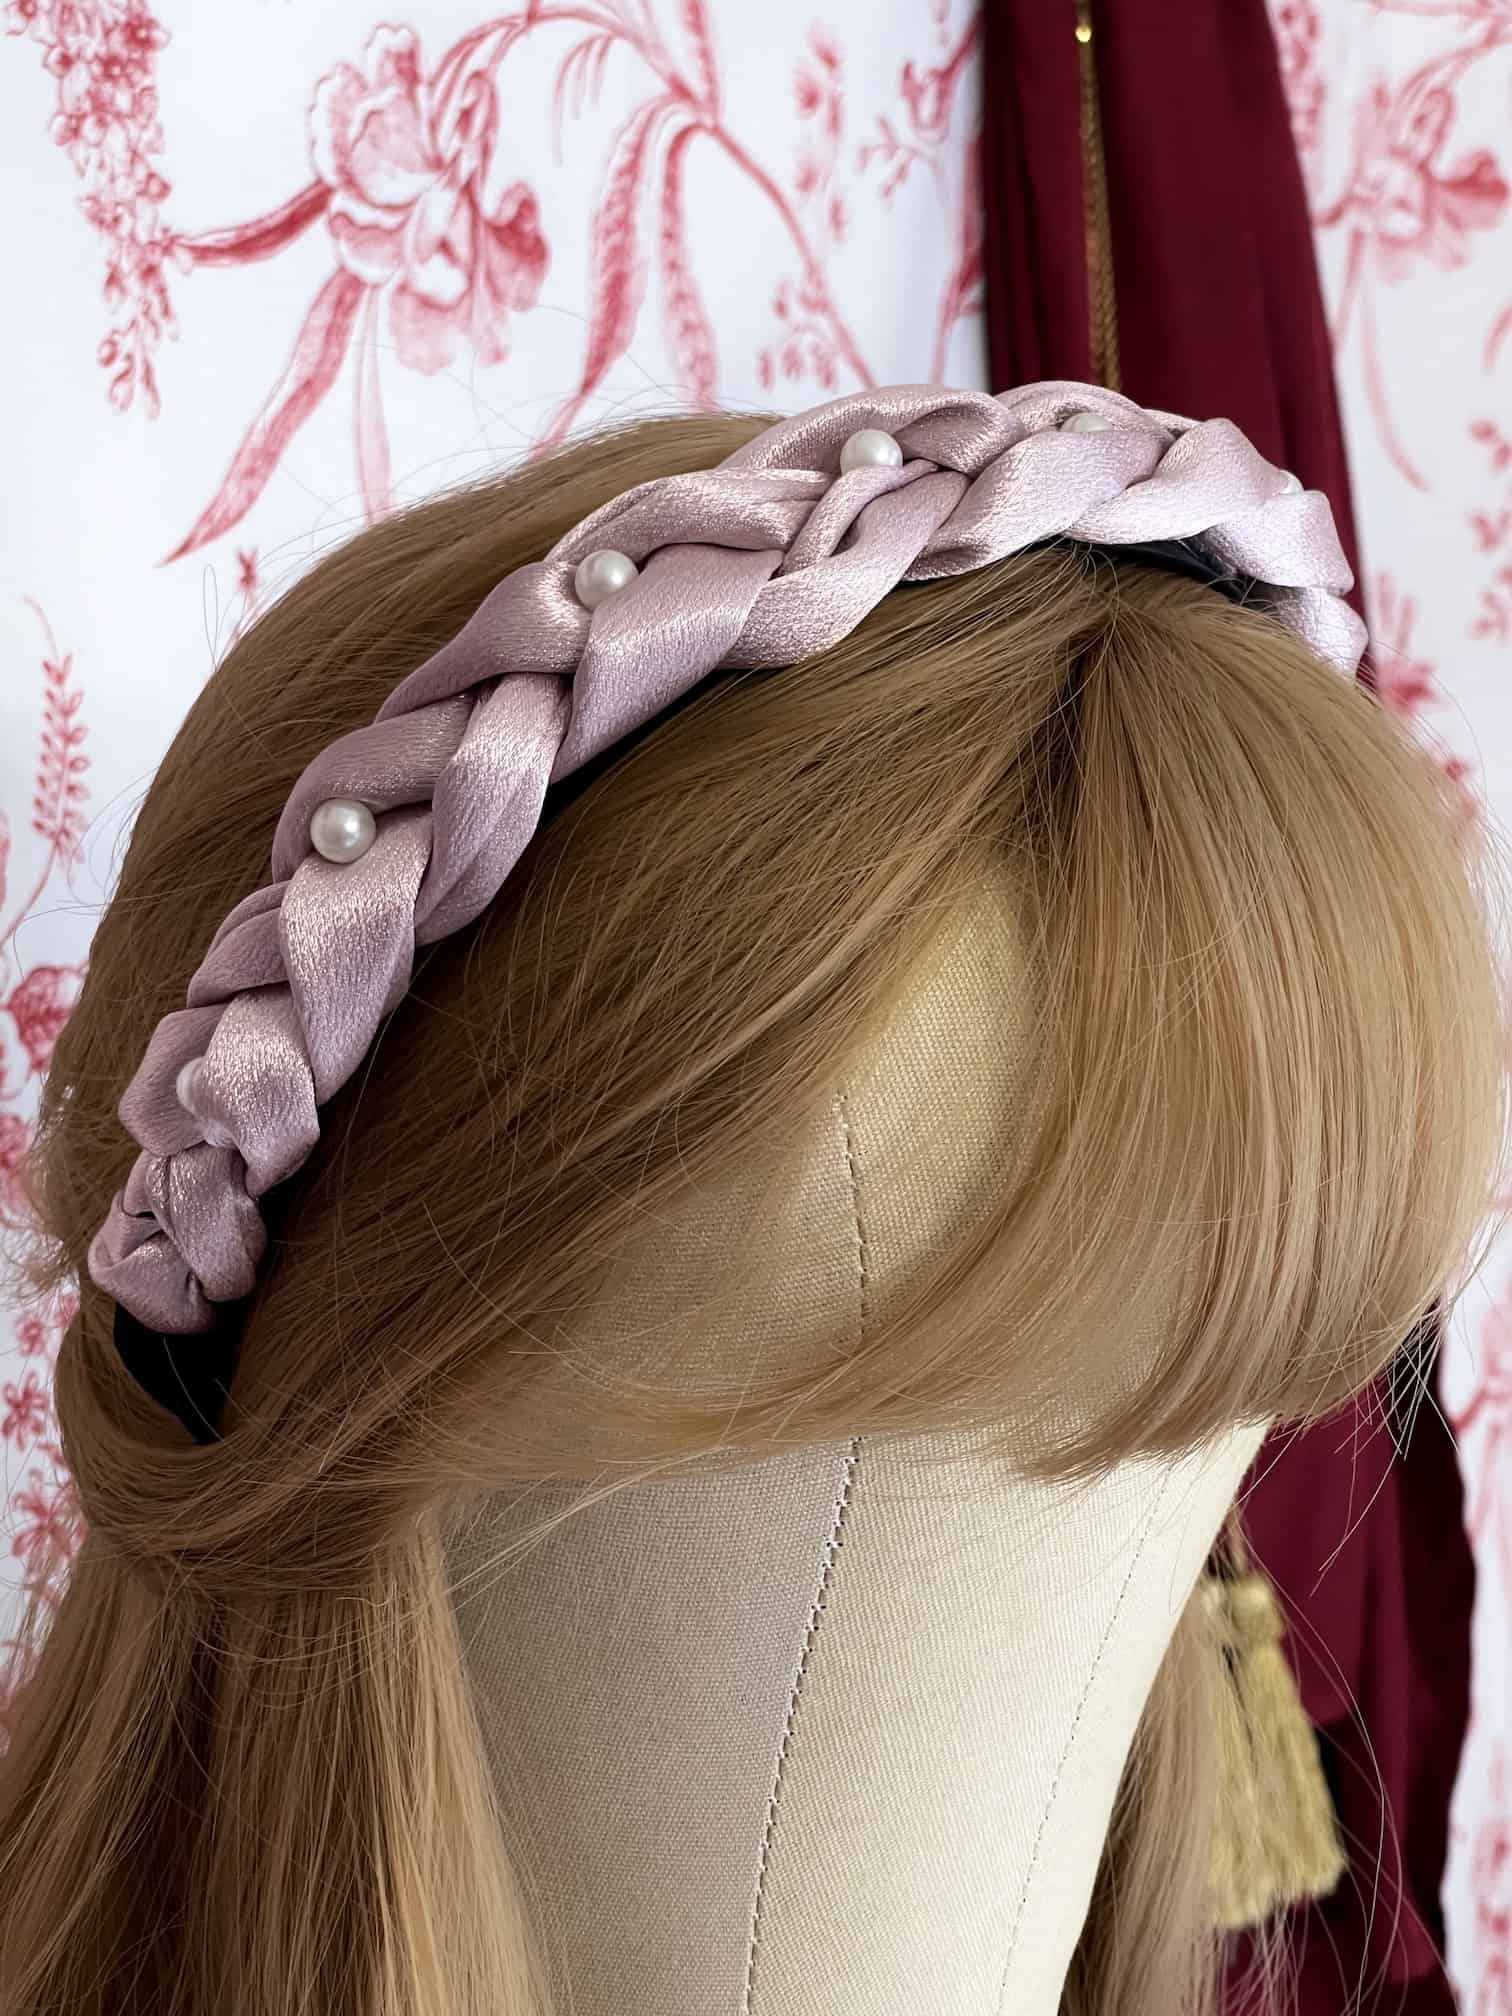 Historically Inspired Braided Satin Pearl Headband in Mauve for Edwardian, Victorian, Rococo, Regency, Baroque, and Renaissance fashion.